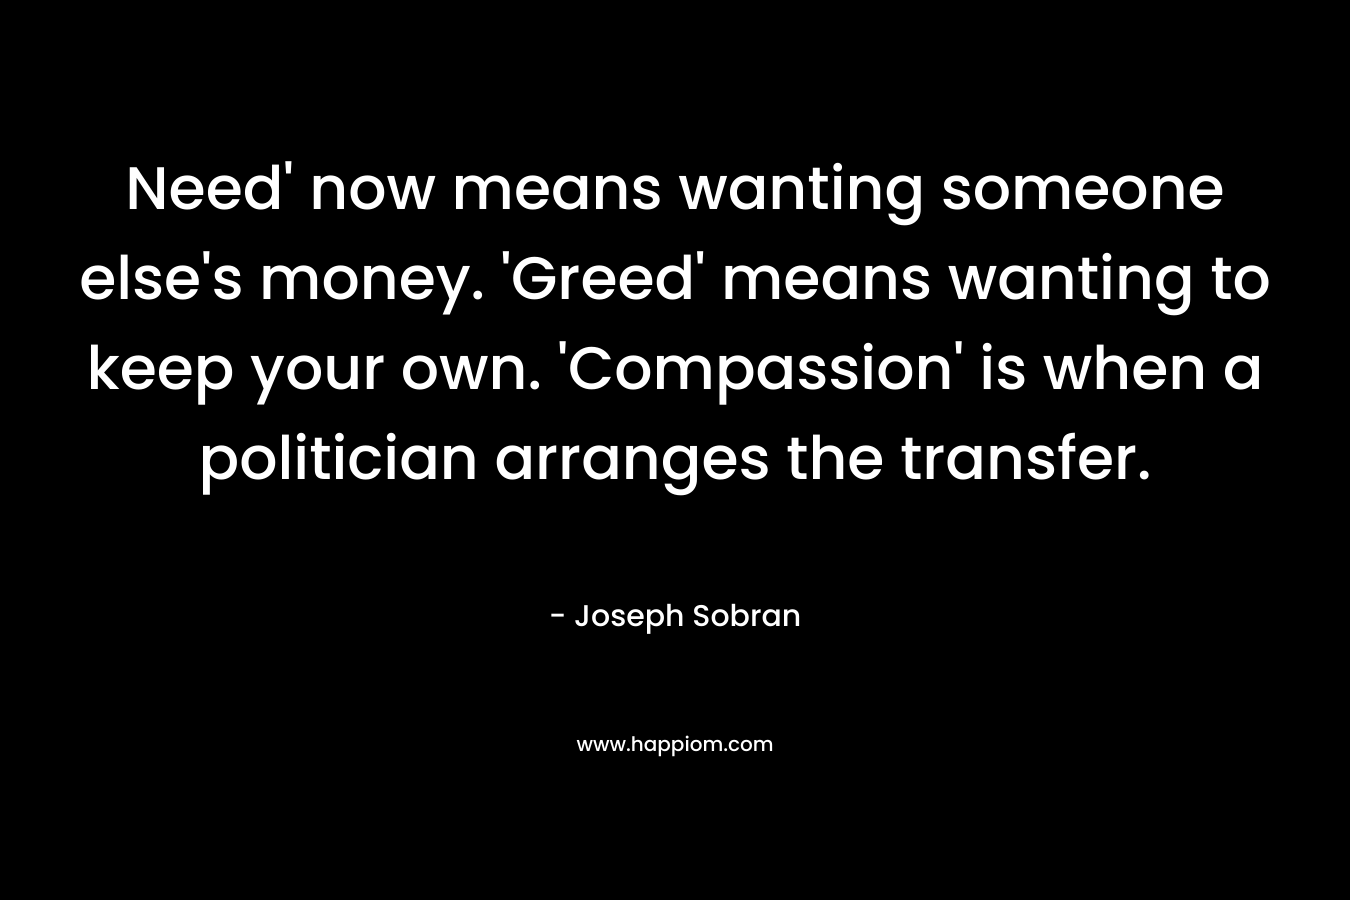 Need’ now means wanting someone else’s money. ‘Greed’ means wanting to keep your own. ‘Compassion’ is when a politician arranges the transfer. – Joseph Sobran